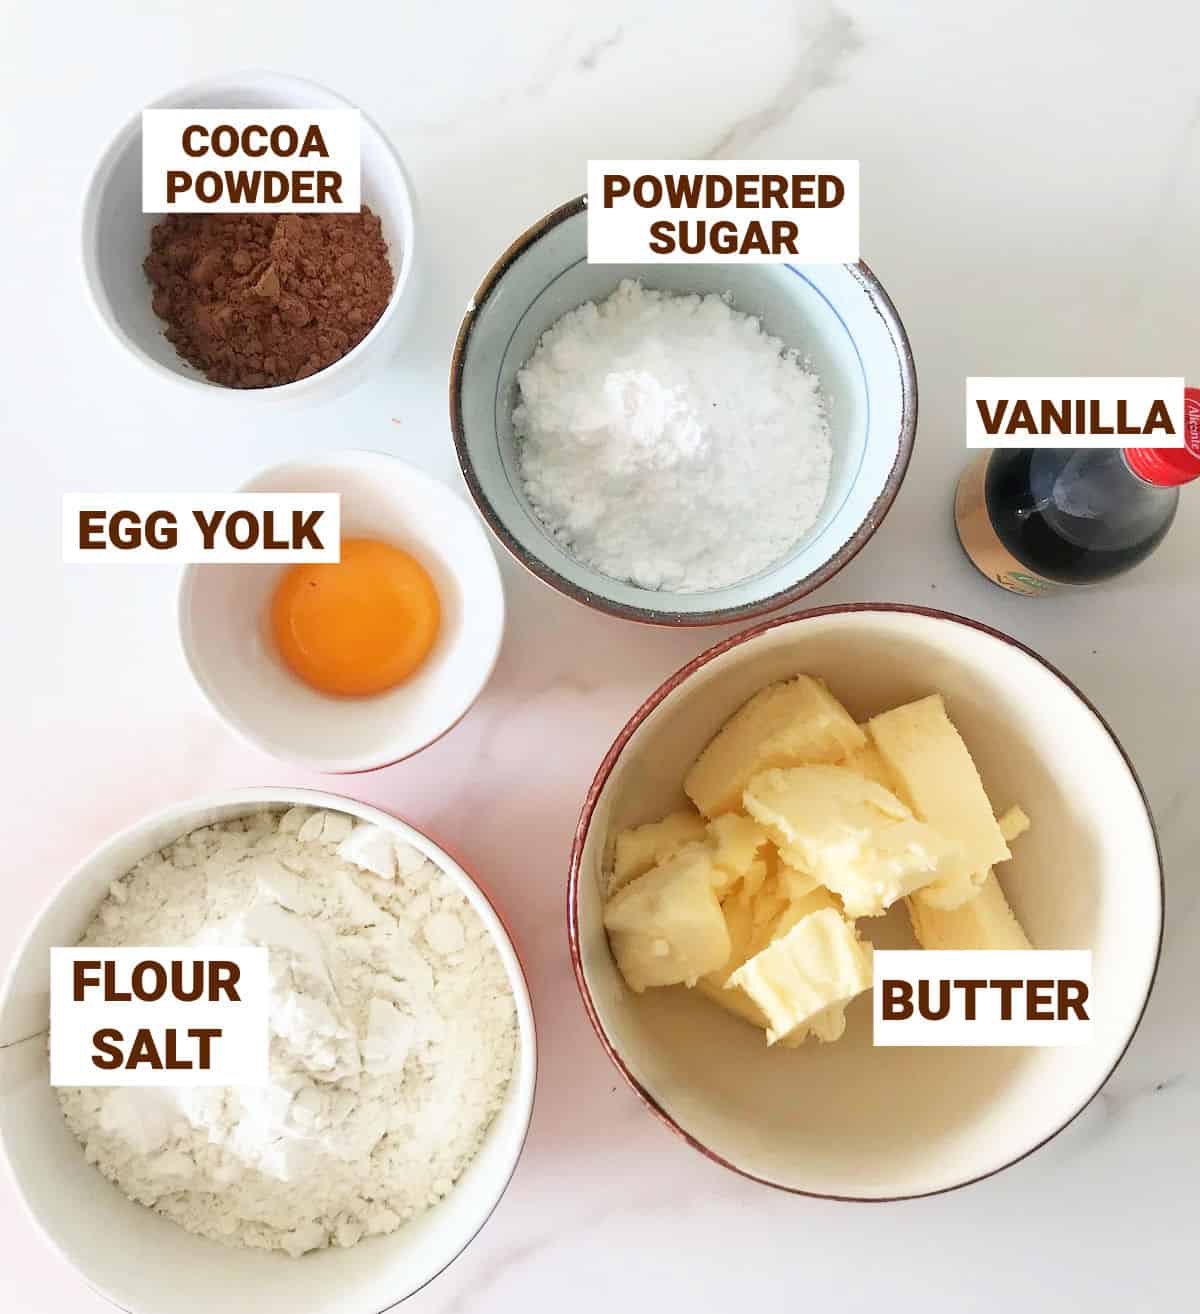 Chocolate pie crust ingredients in bowls on white surface including egg yolk, cocoa powder, vanilla, powdered sugar, butter.